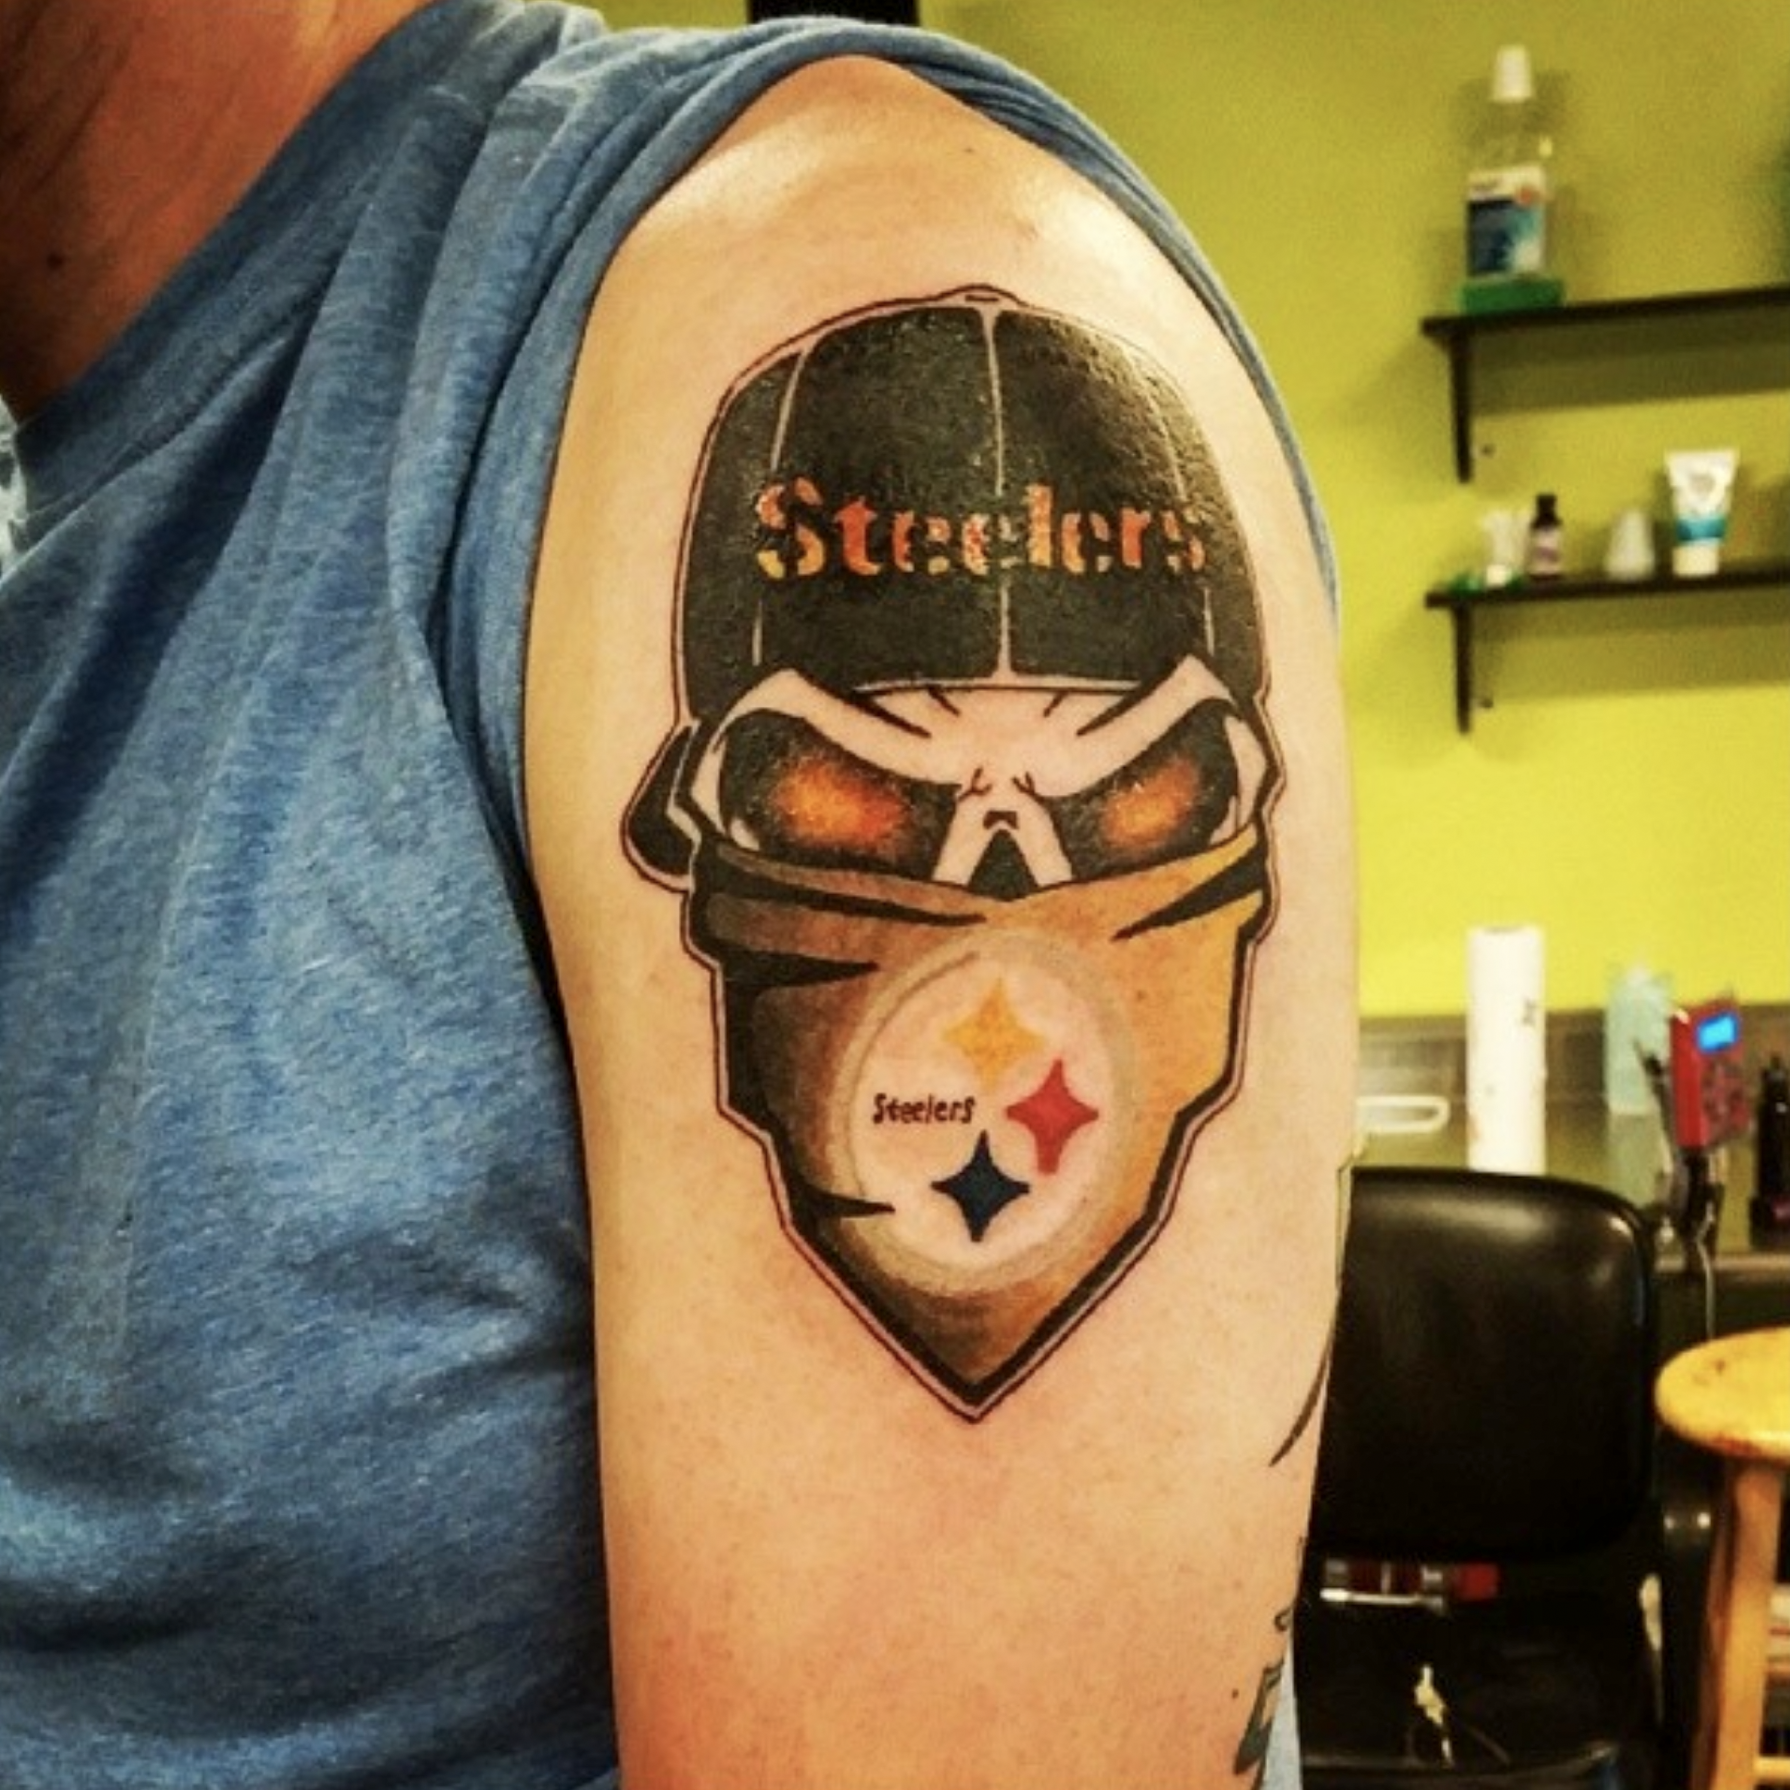 Tattoo uploaded by Charlie Connell  The Pittsburgh Steelers aint nothin  to fuck with Via IG  doubledeeztat2s  Tattoodo